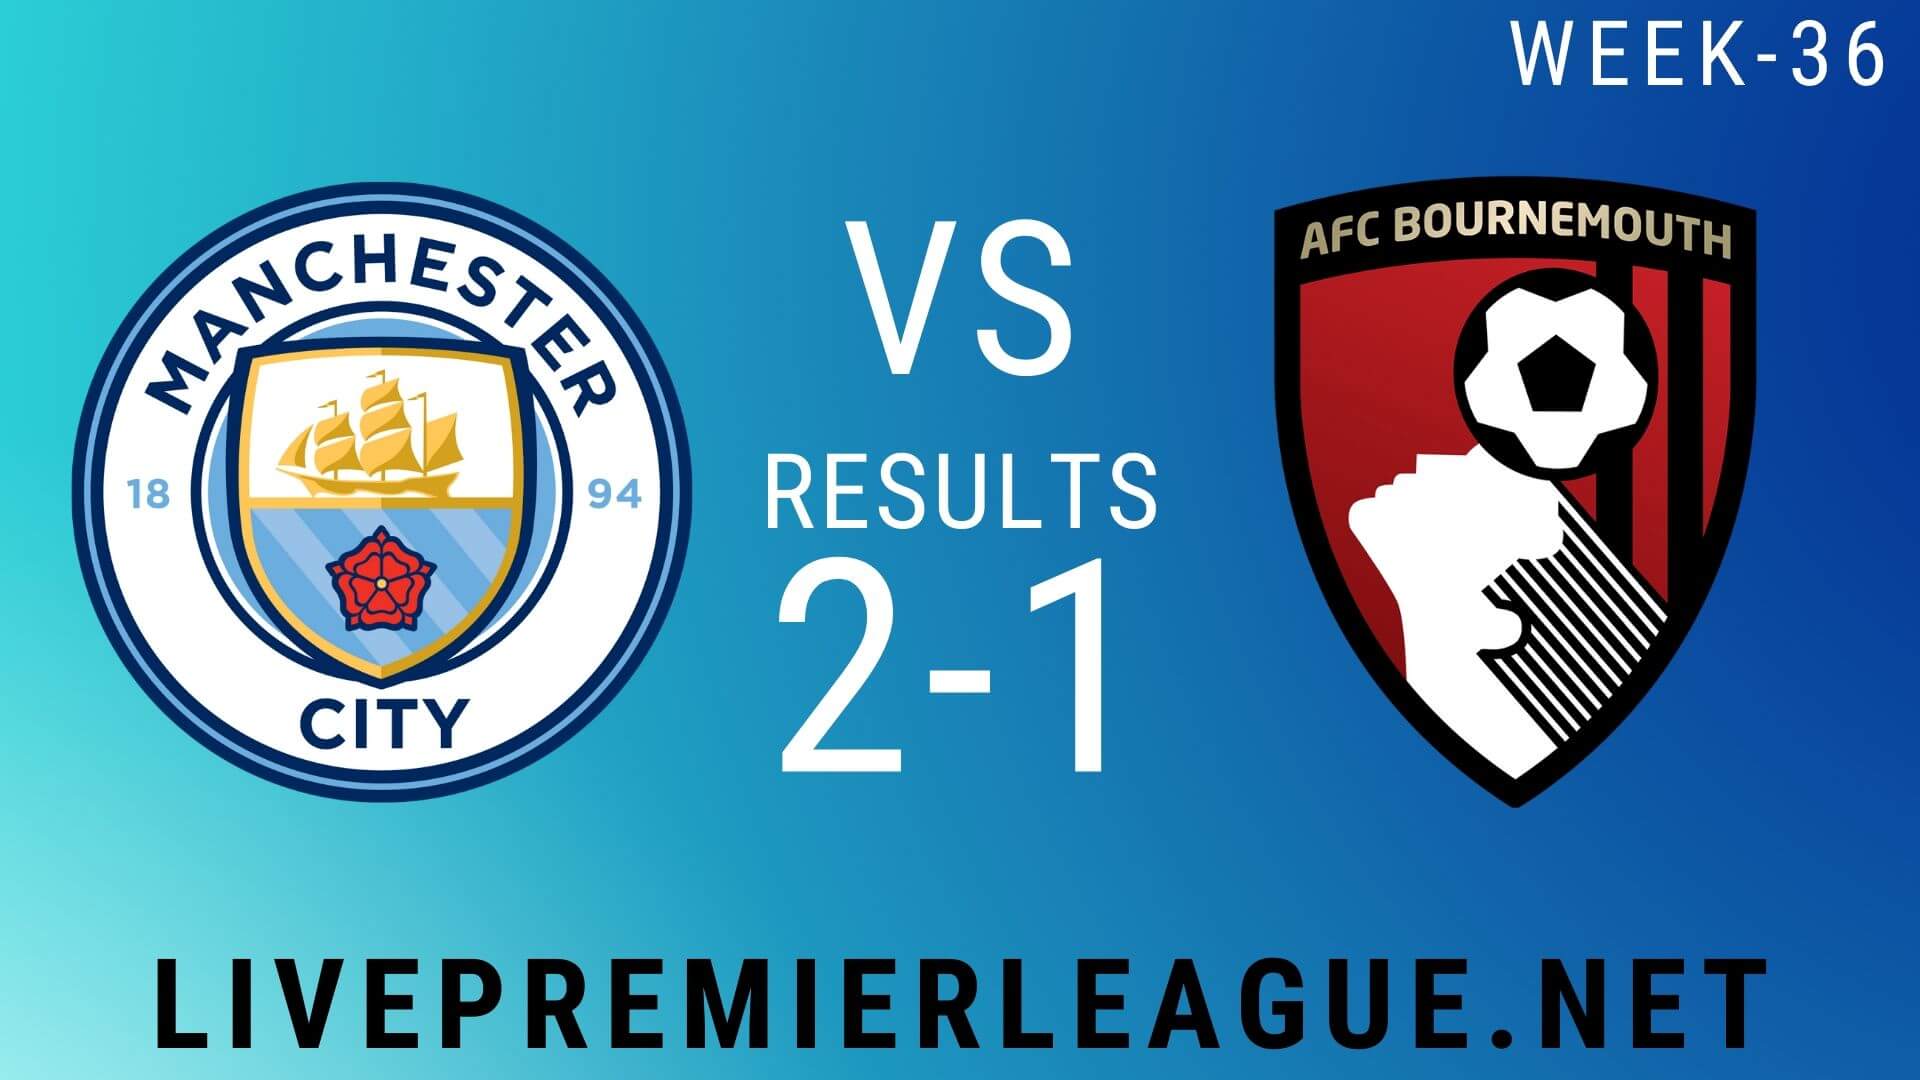 Manchester City Vs AFC Bournemouth | Week 36 Result 2020